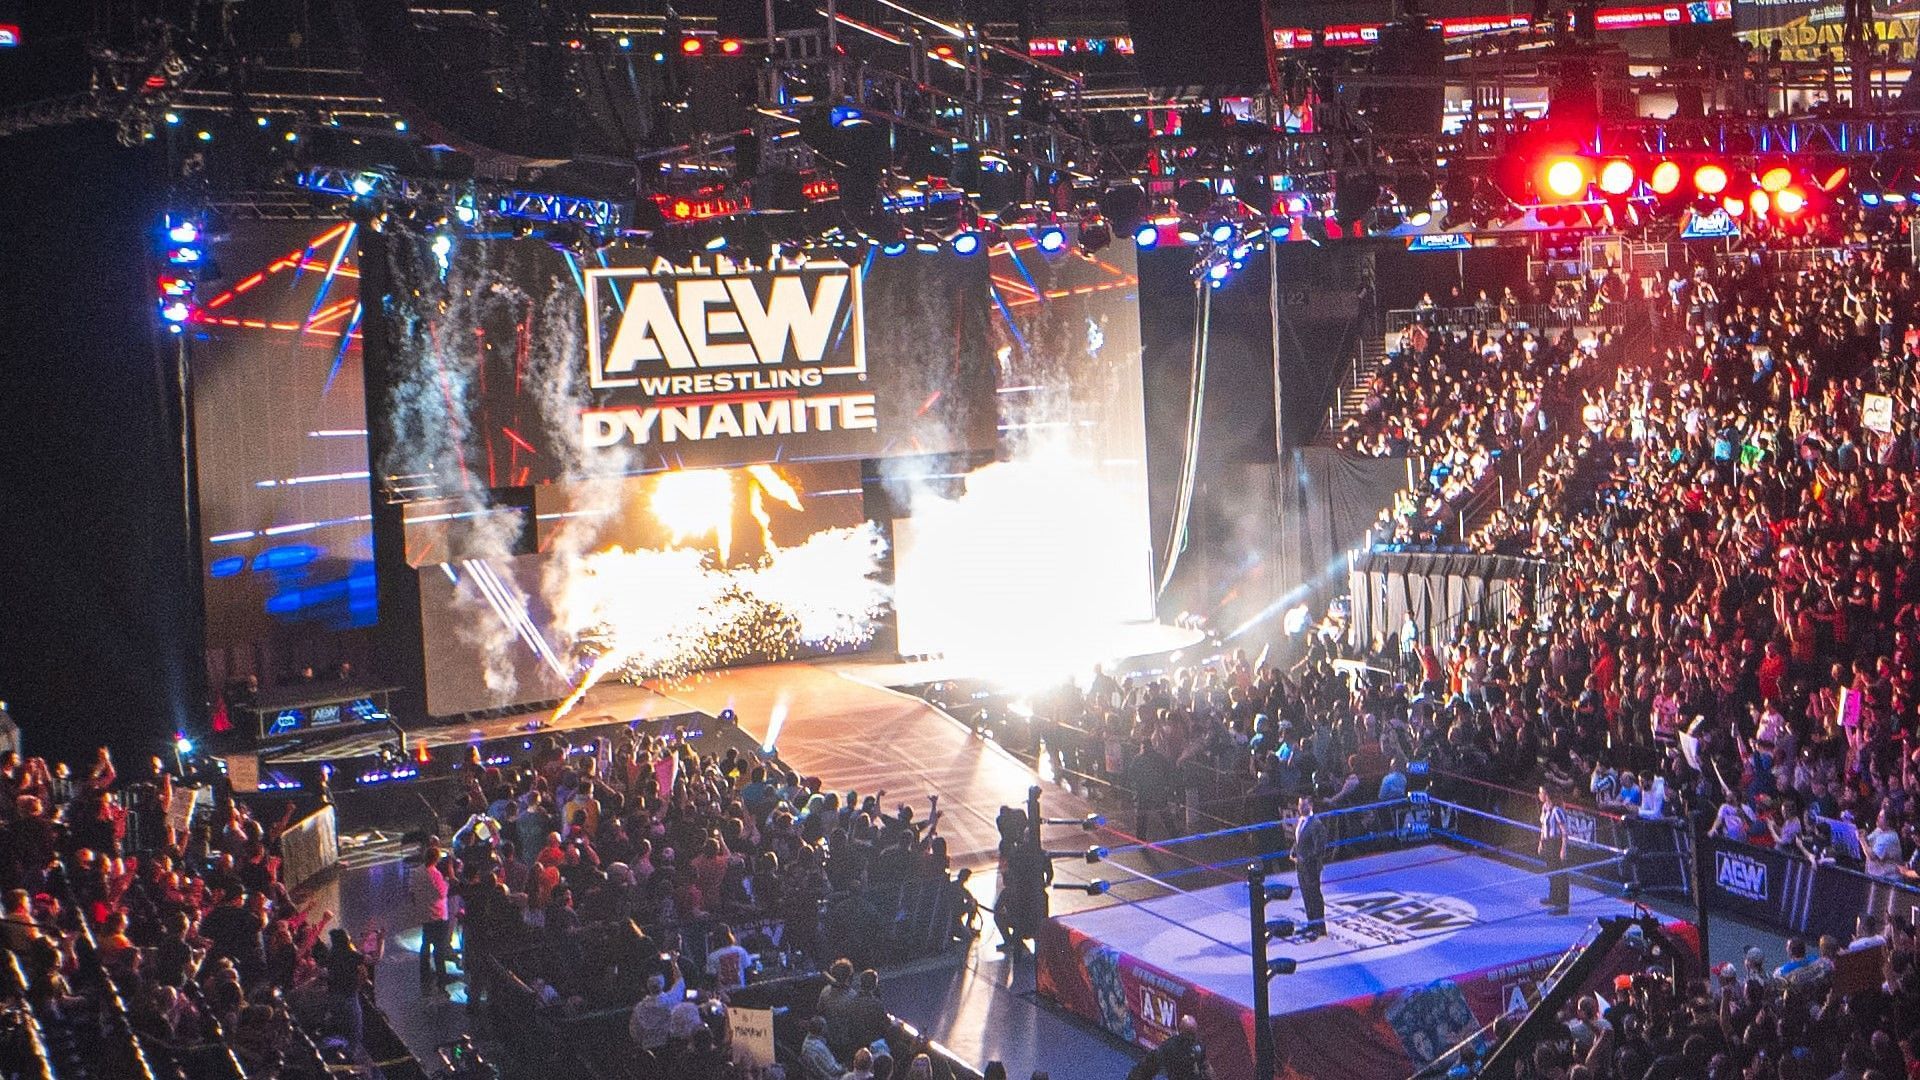 A look at the AEW Dynamite ring and stage/set inside an arena